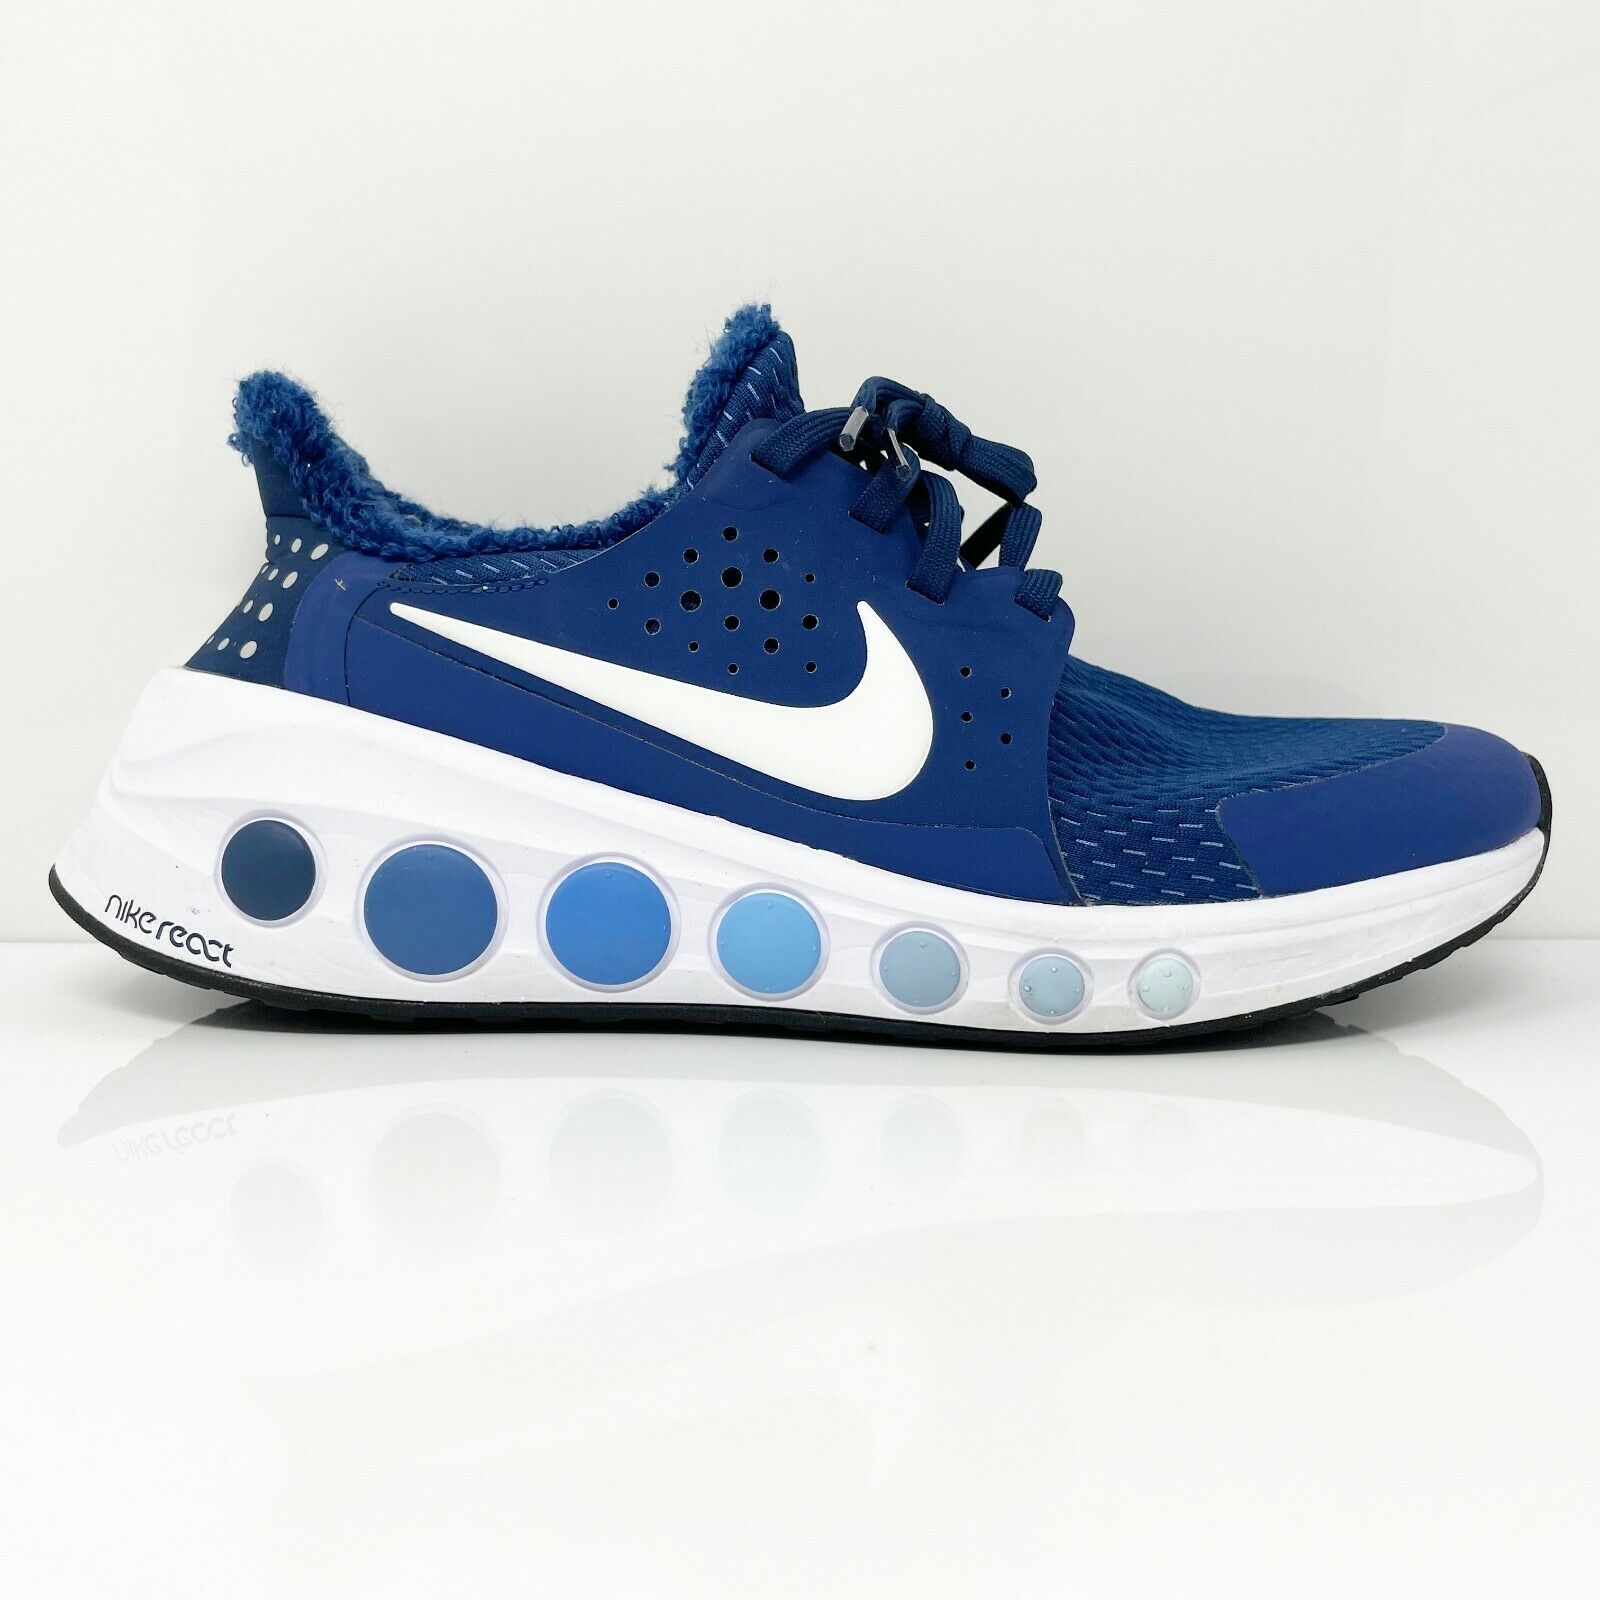 Nike Mens Cruzrone CD7307-400 Blue White Running Shoes Sneakers Size 9.5